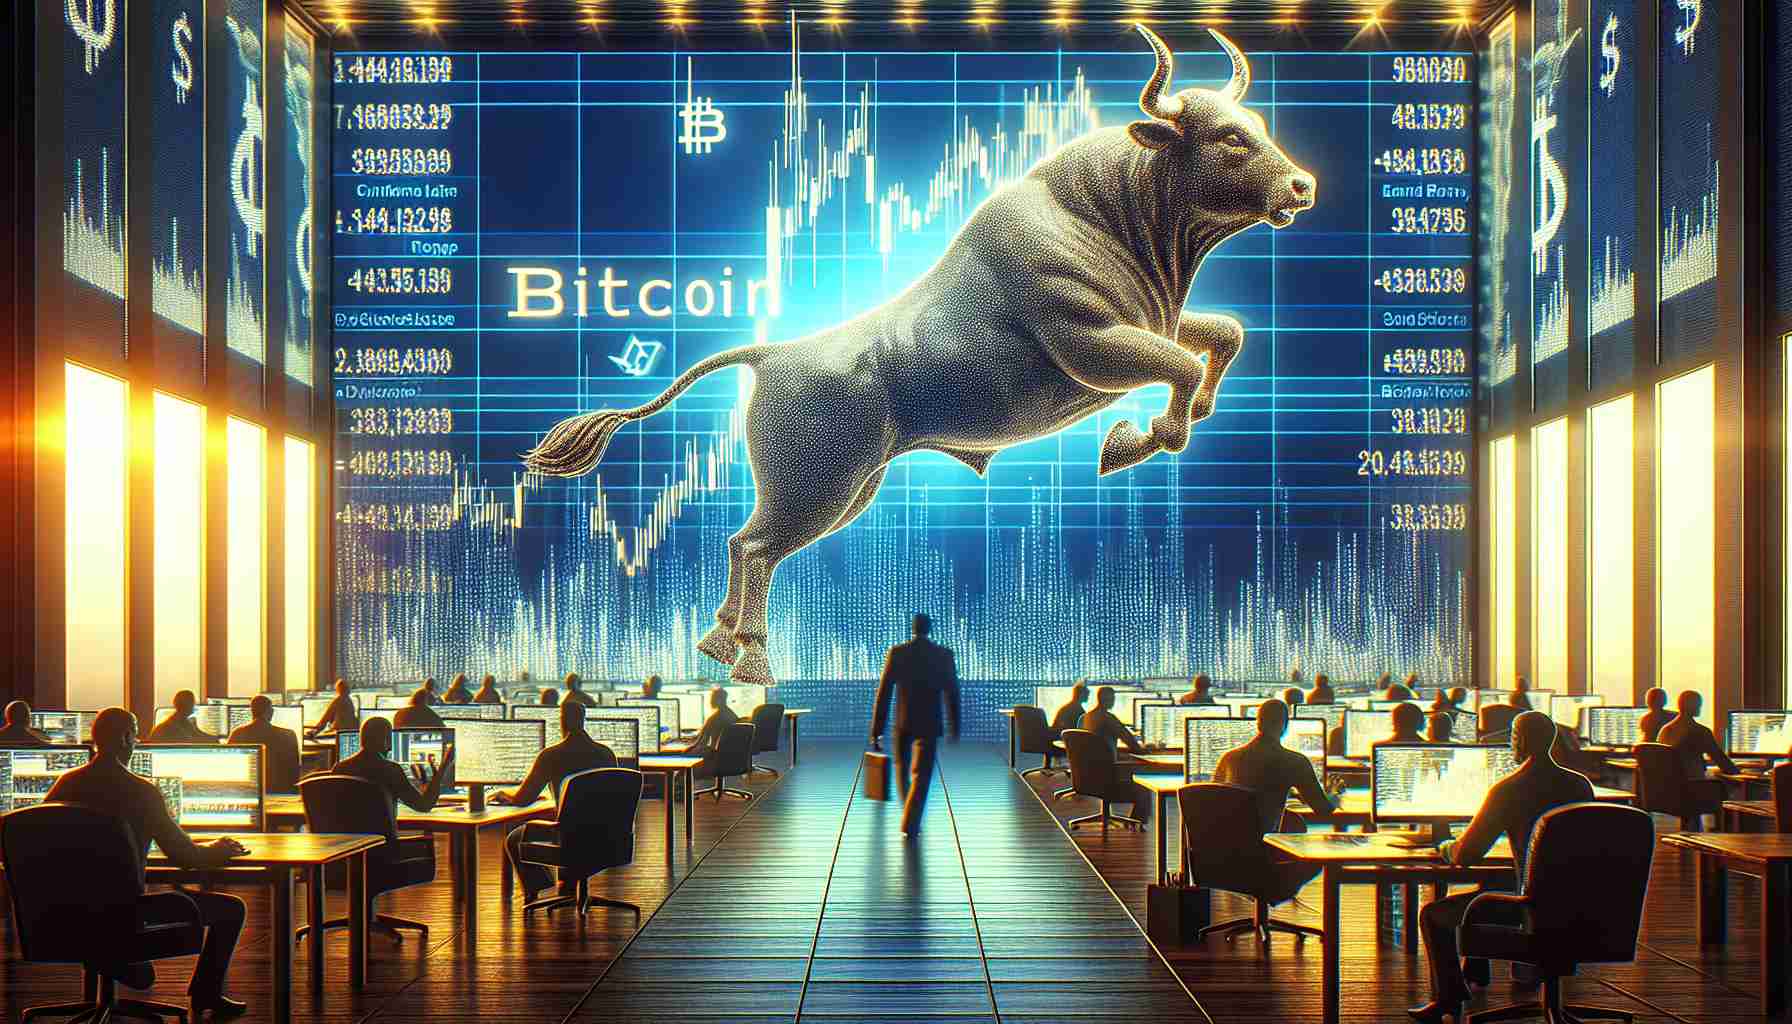 Create a realistic HD photo representing positive signals for Bitcoin, symbolized by a surging bull. The scene is set at a high-tech digital securities exchange. Data screens flicker with figures denoting billions of currency being withdrawn by confident investors. The atmosphere of the image should be optimistic, embodying the notion of a bullish market.